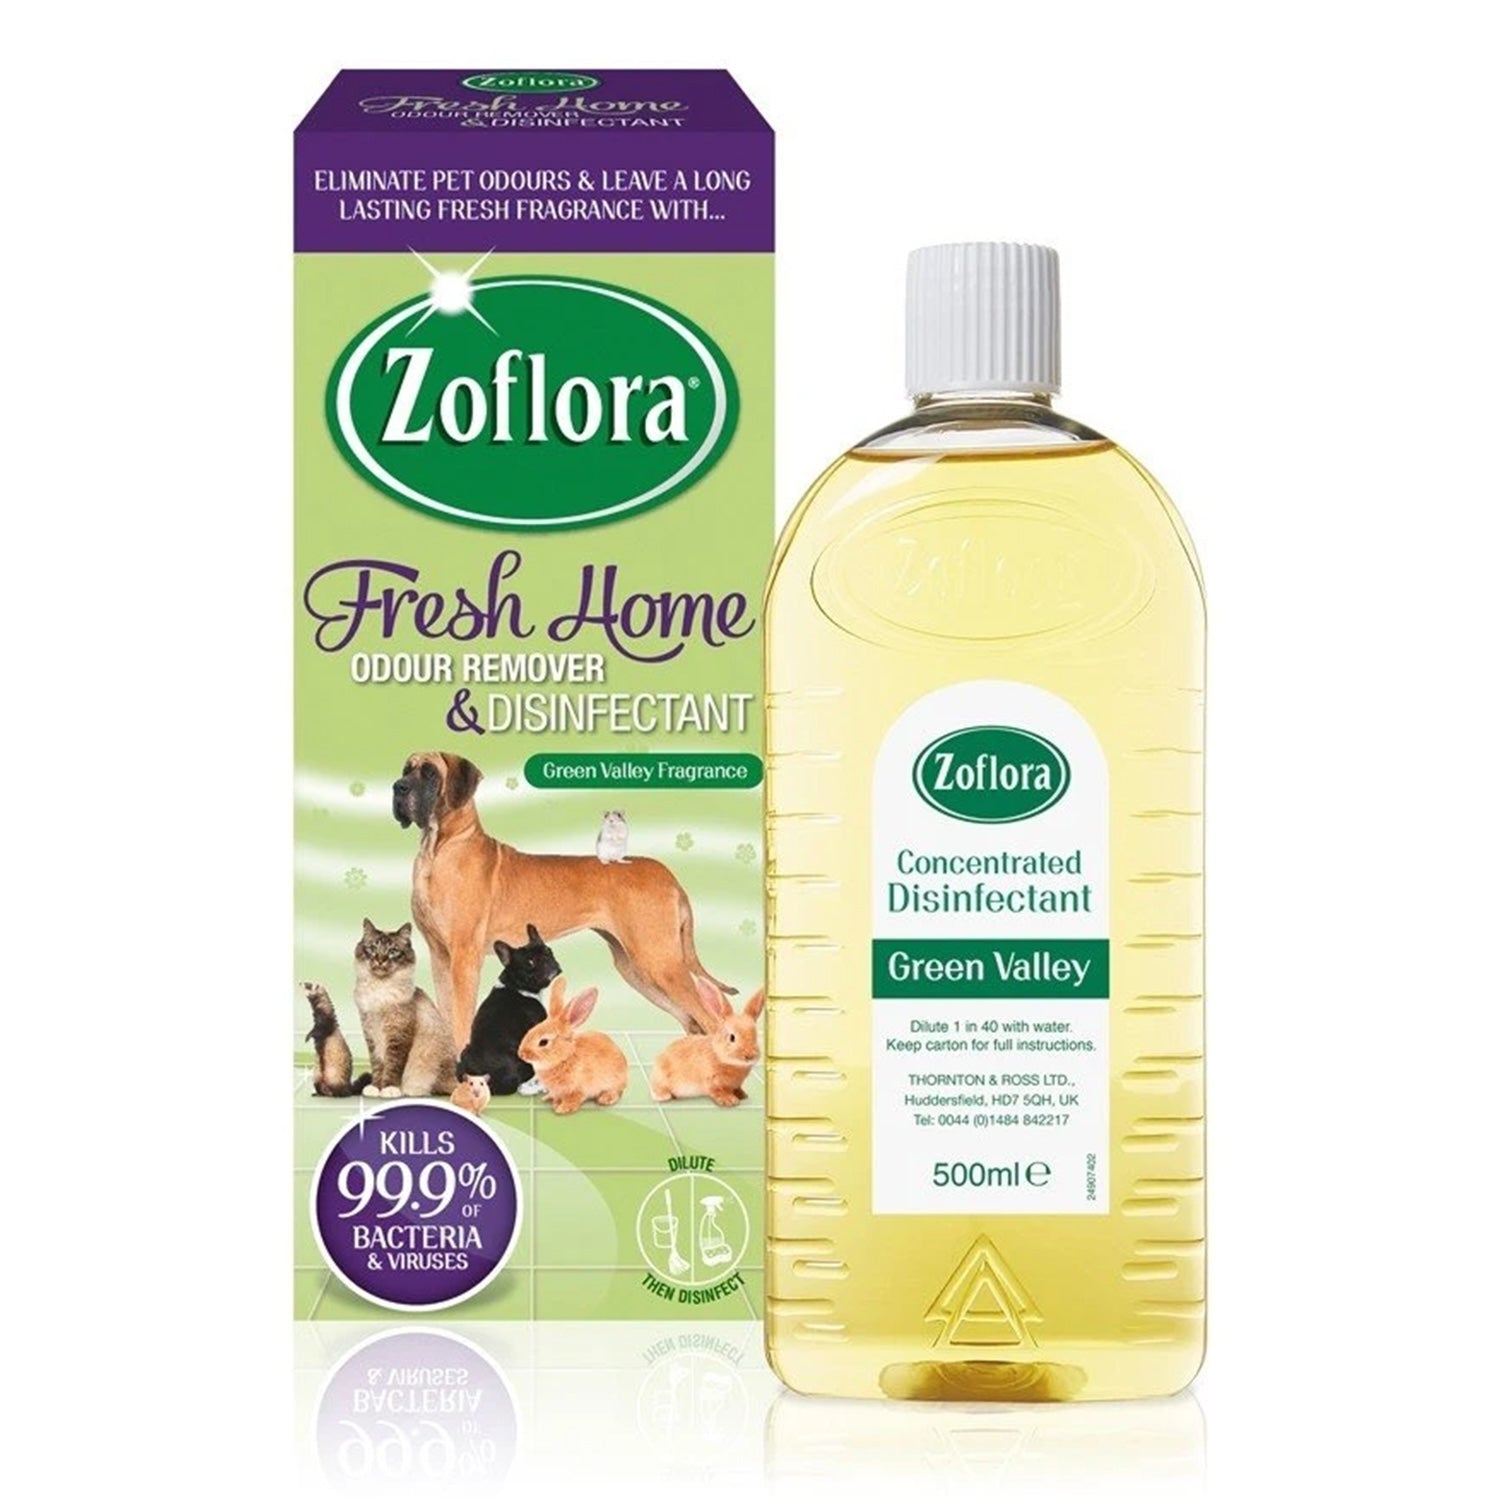 Zoflora Disinfectant | 500ml | Assorted Scents (2)